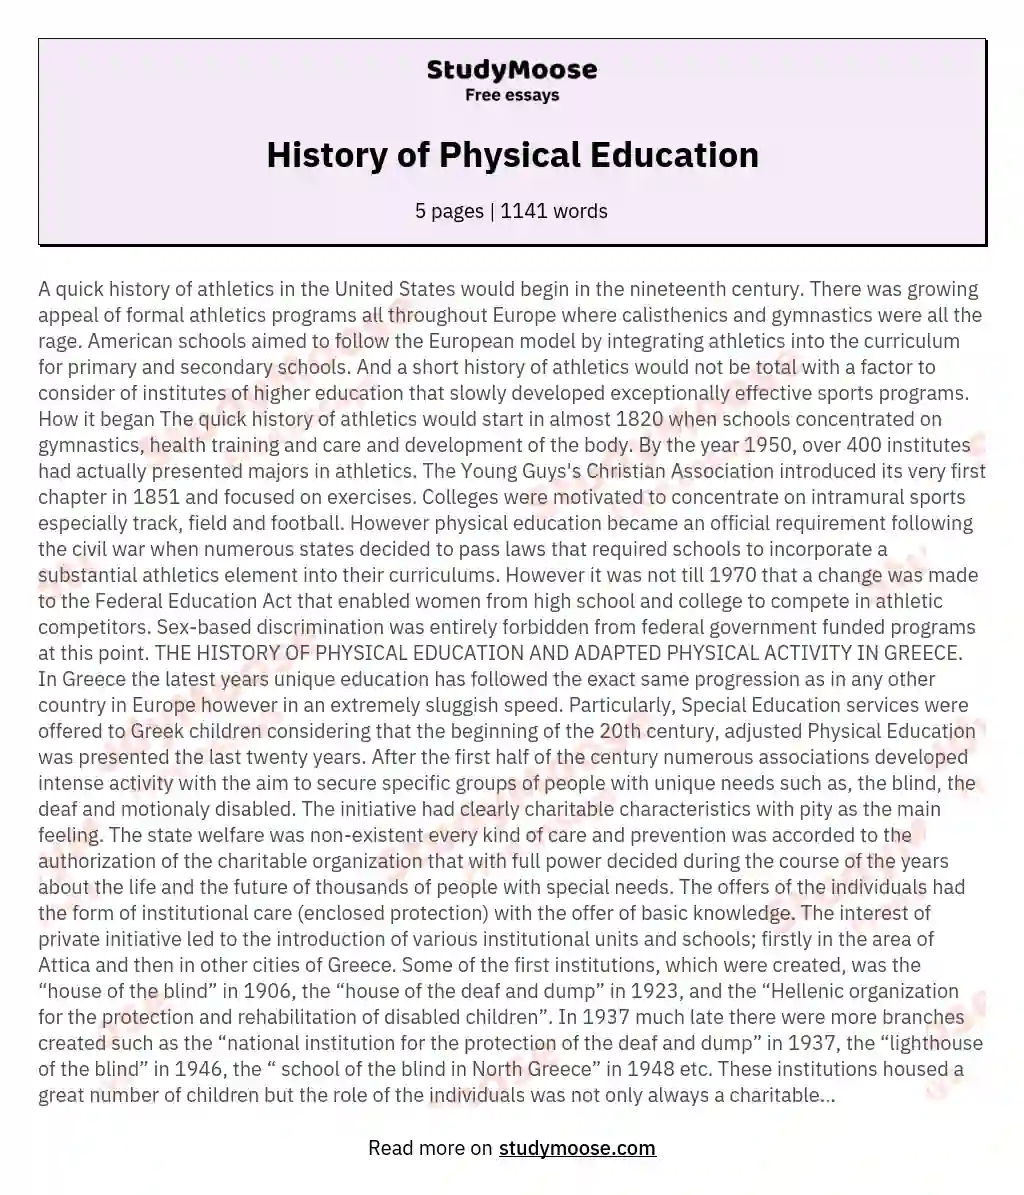 importance of physical education essay 250 words